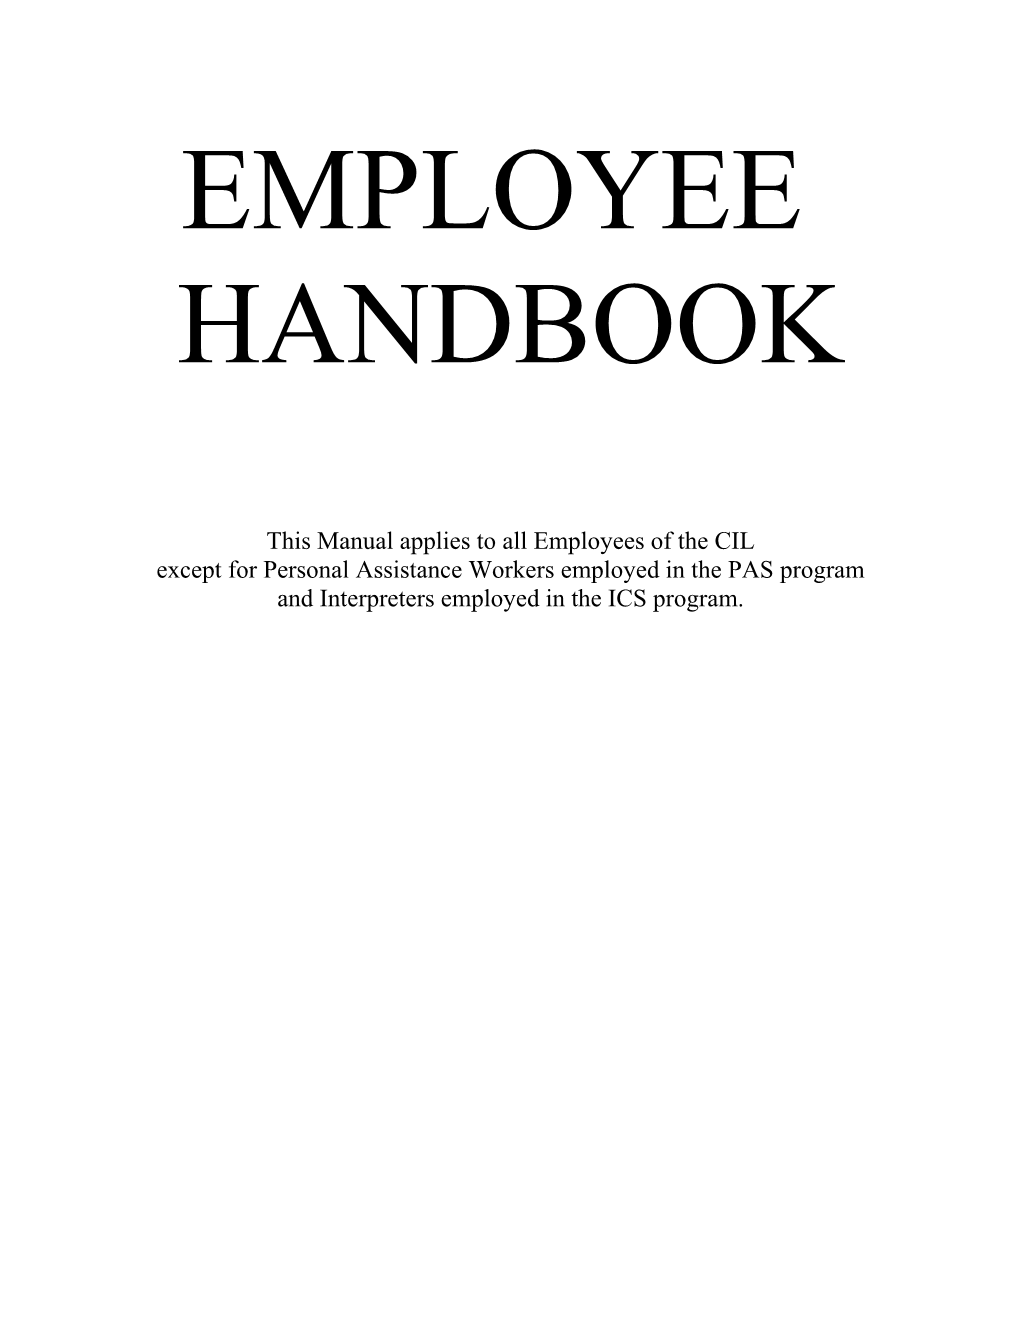 This Manual Applies to All Employees of the CIL